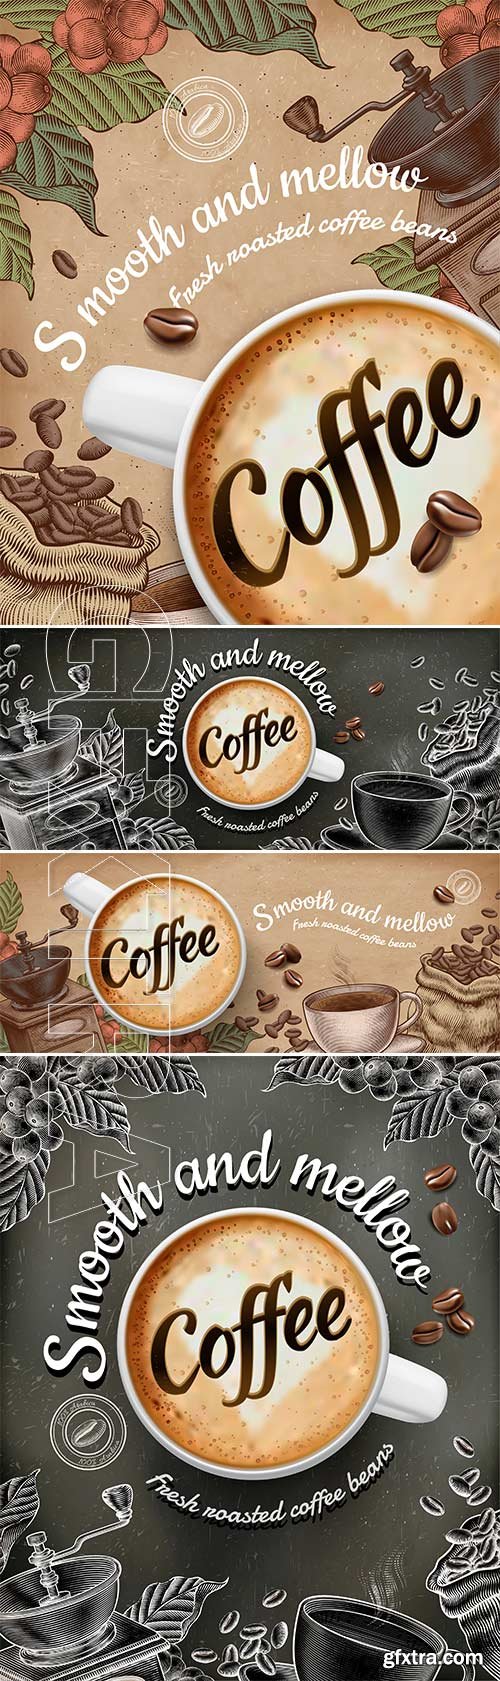 Coffee poster ads with 3d vector illustratin latte